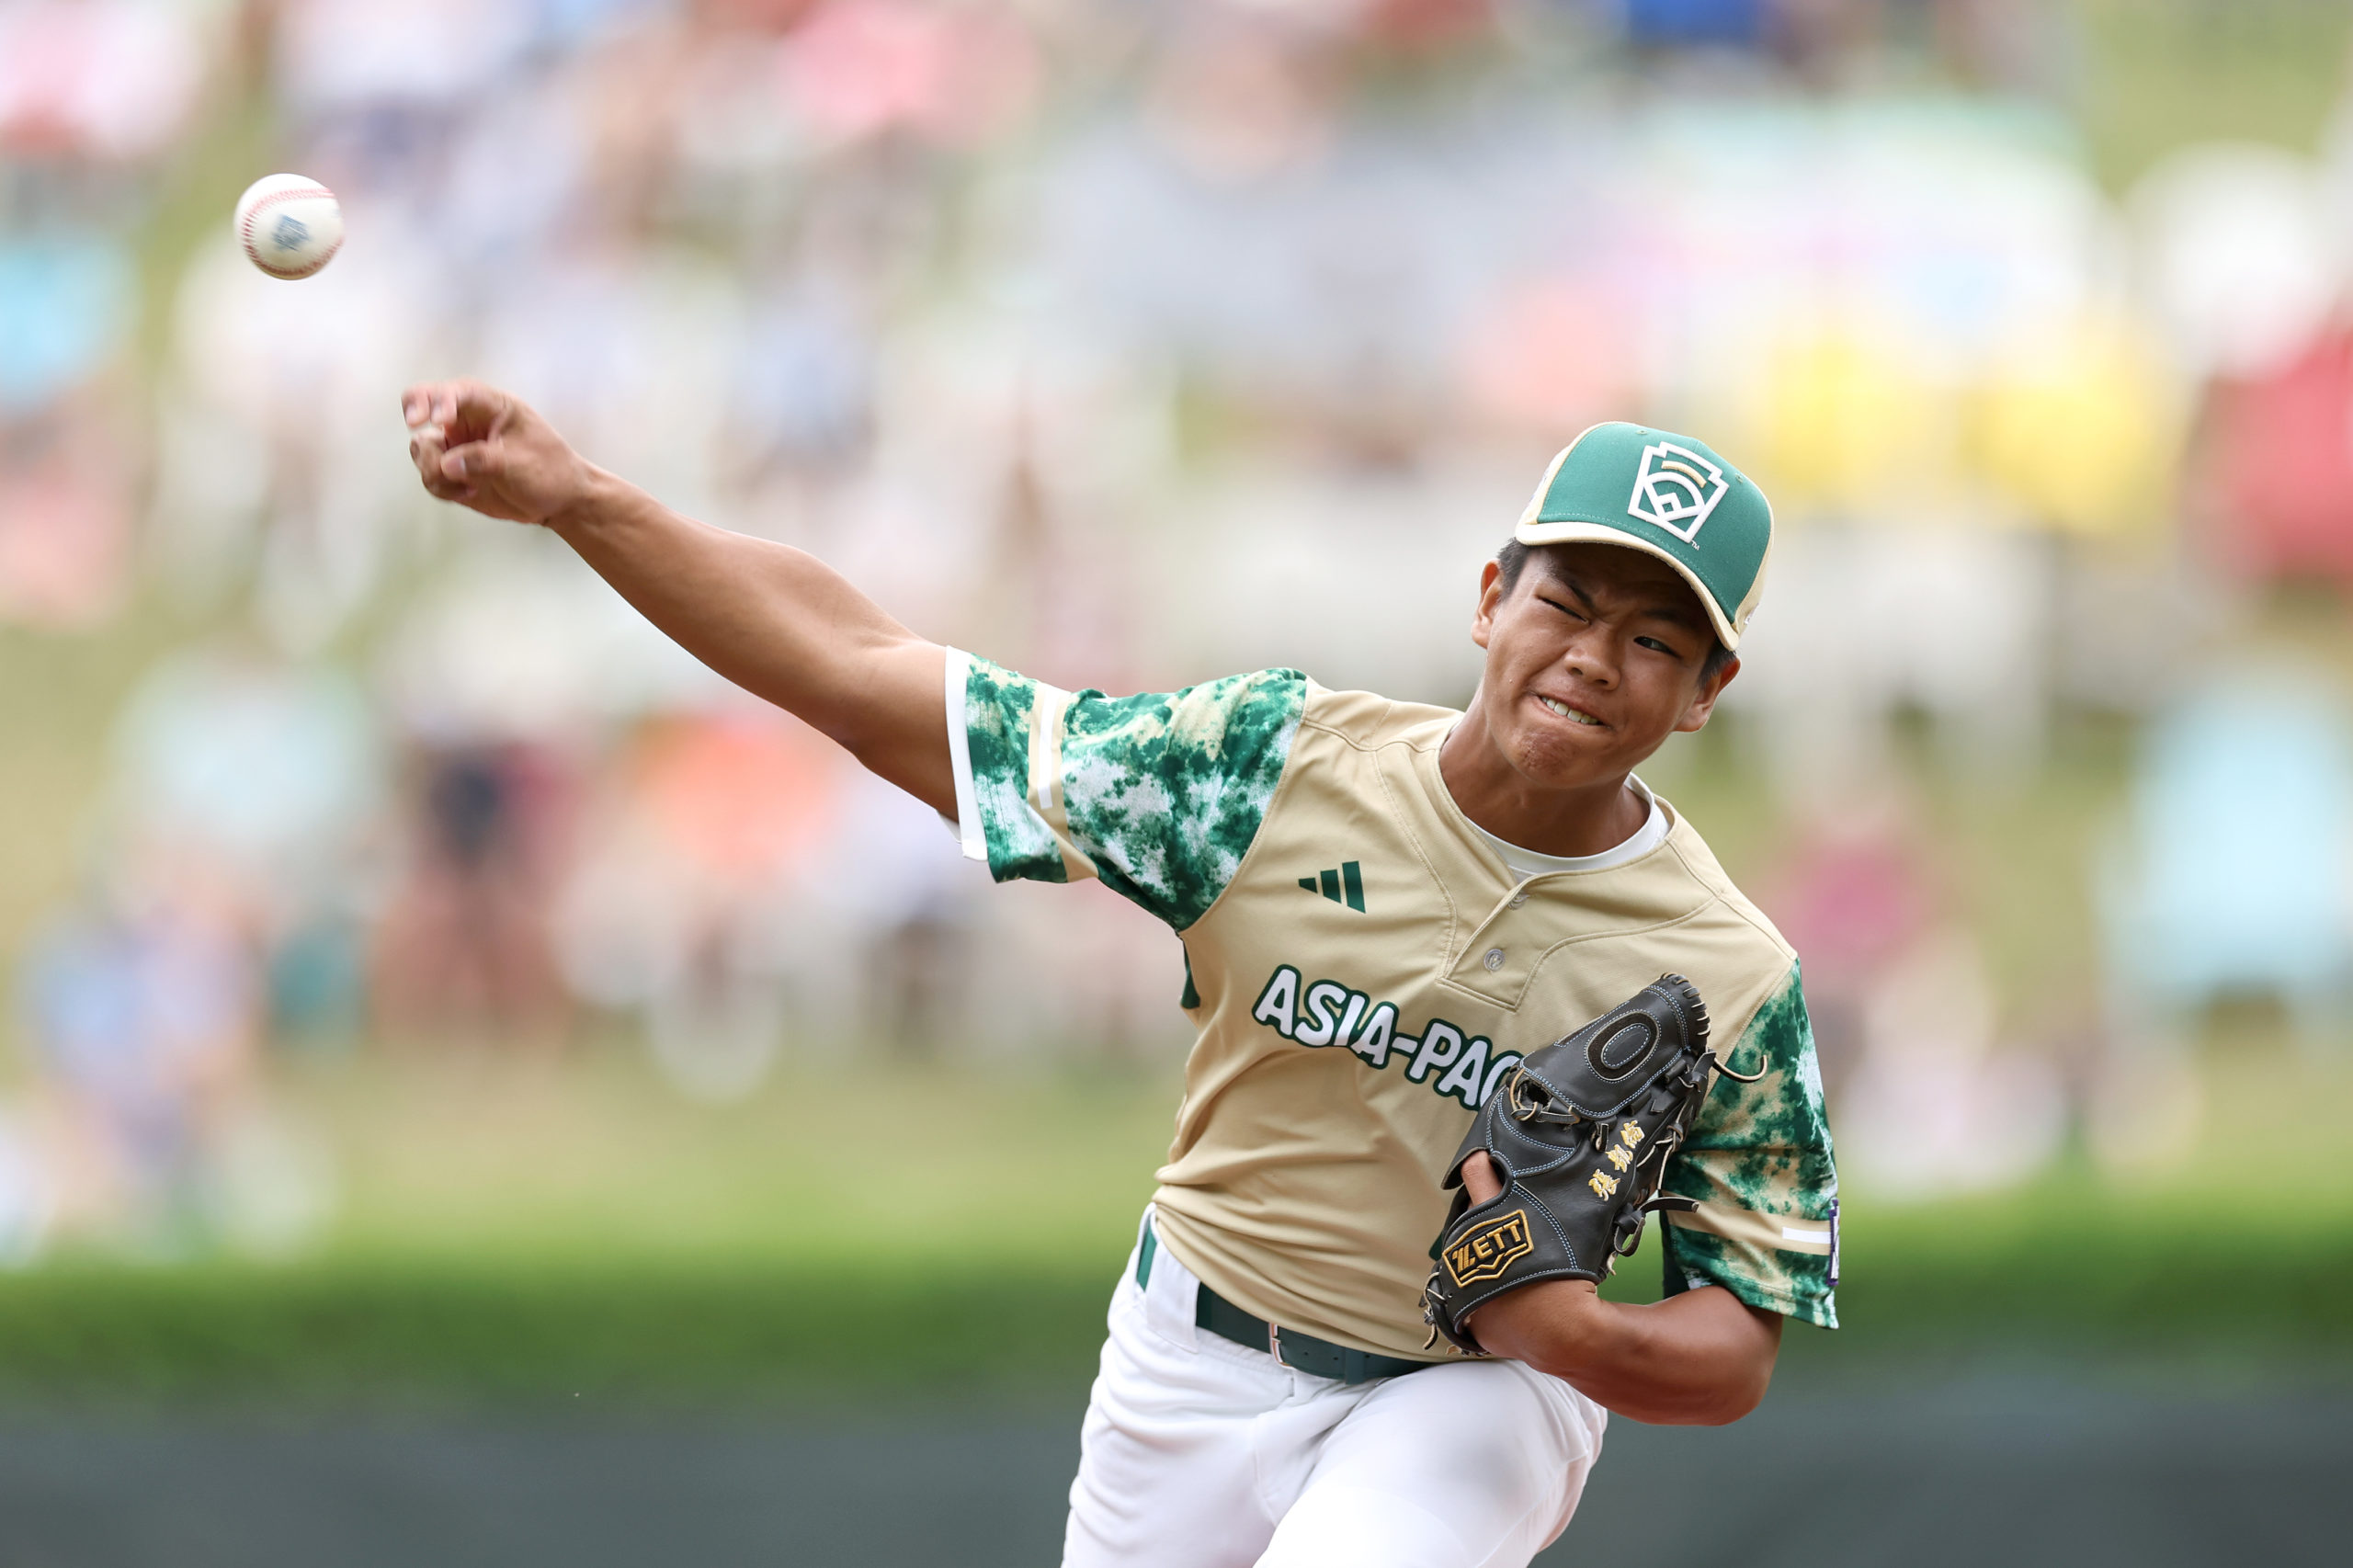 SOUTH WILLIAMSPORT, PENNSYLVANIA - AUGUST 27: Fan Chen-Jun #17 of the Asia-Pacific Region team from Taipei City, Chinese Taipei pitches during the first inning against the Southwest Region team from Needville, Texas during the Little League World Series Consolation Game at Little League International Complex on August 27, 2023 in South Williamsport, Pennsylvania. (Photo by Tim Nwachukwu/Getty Images)